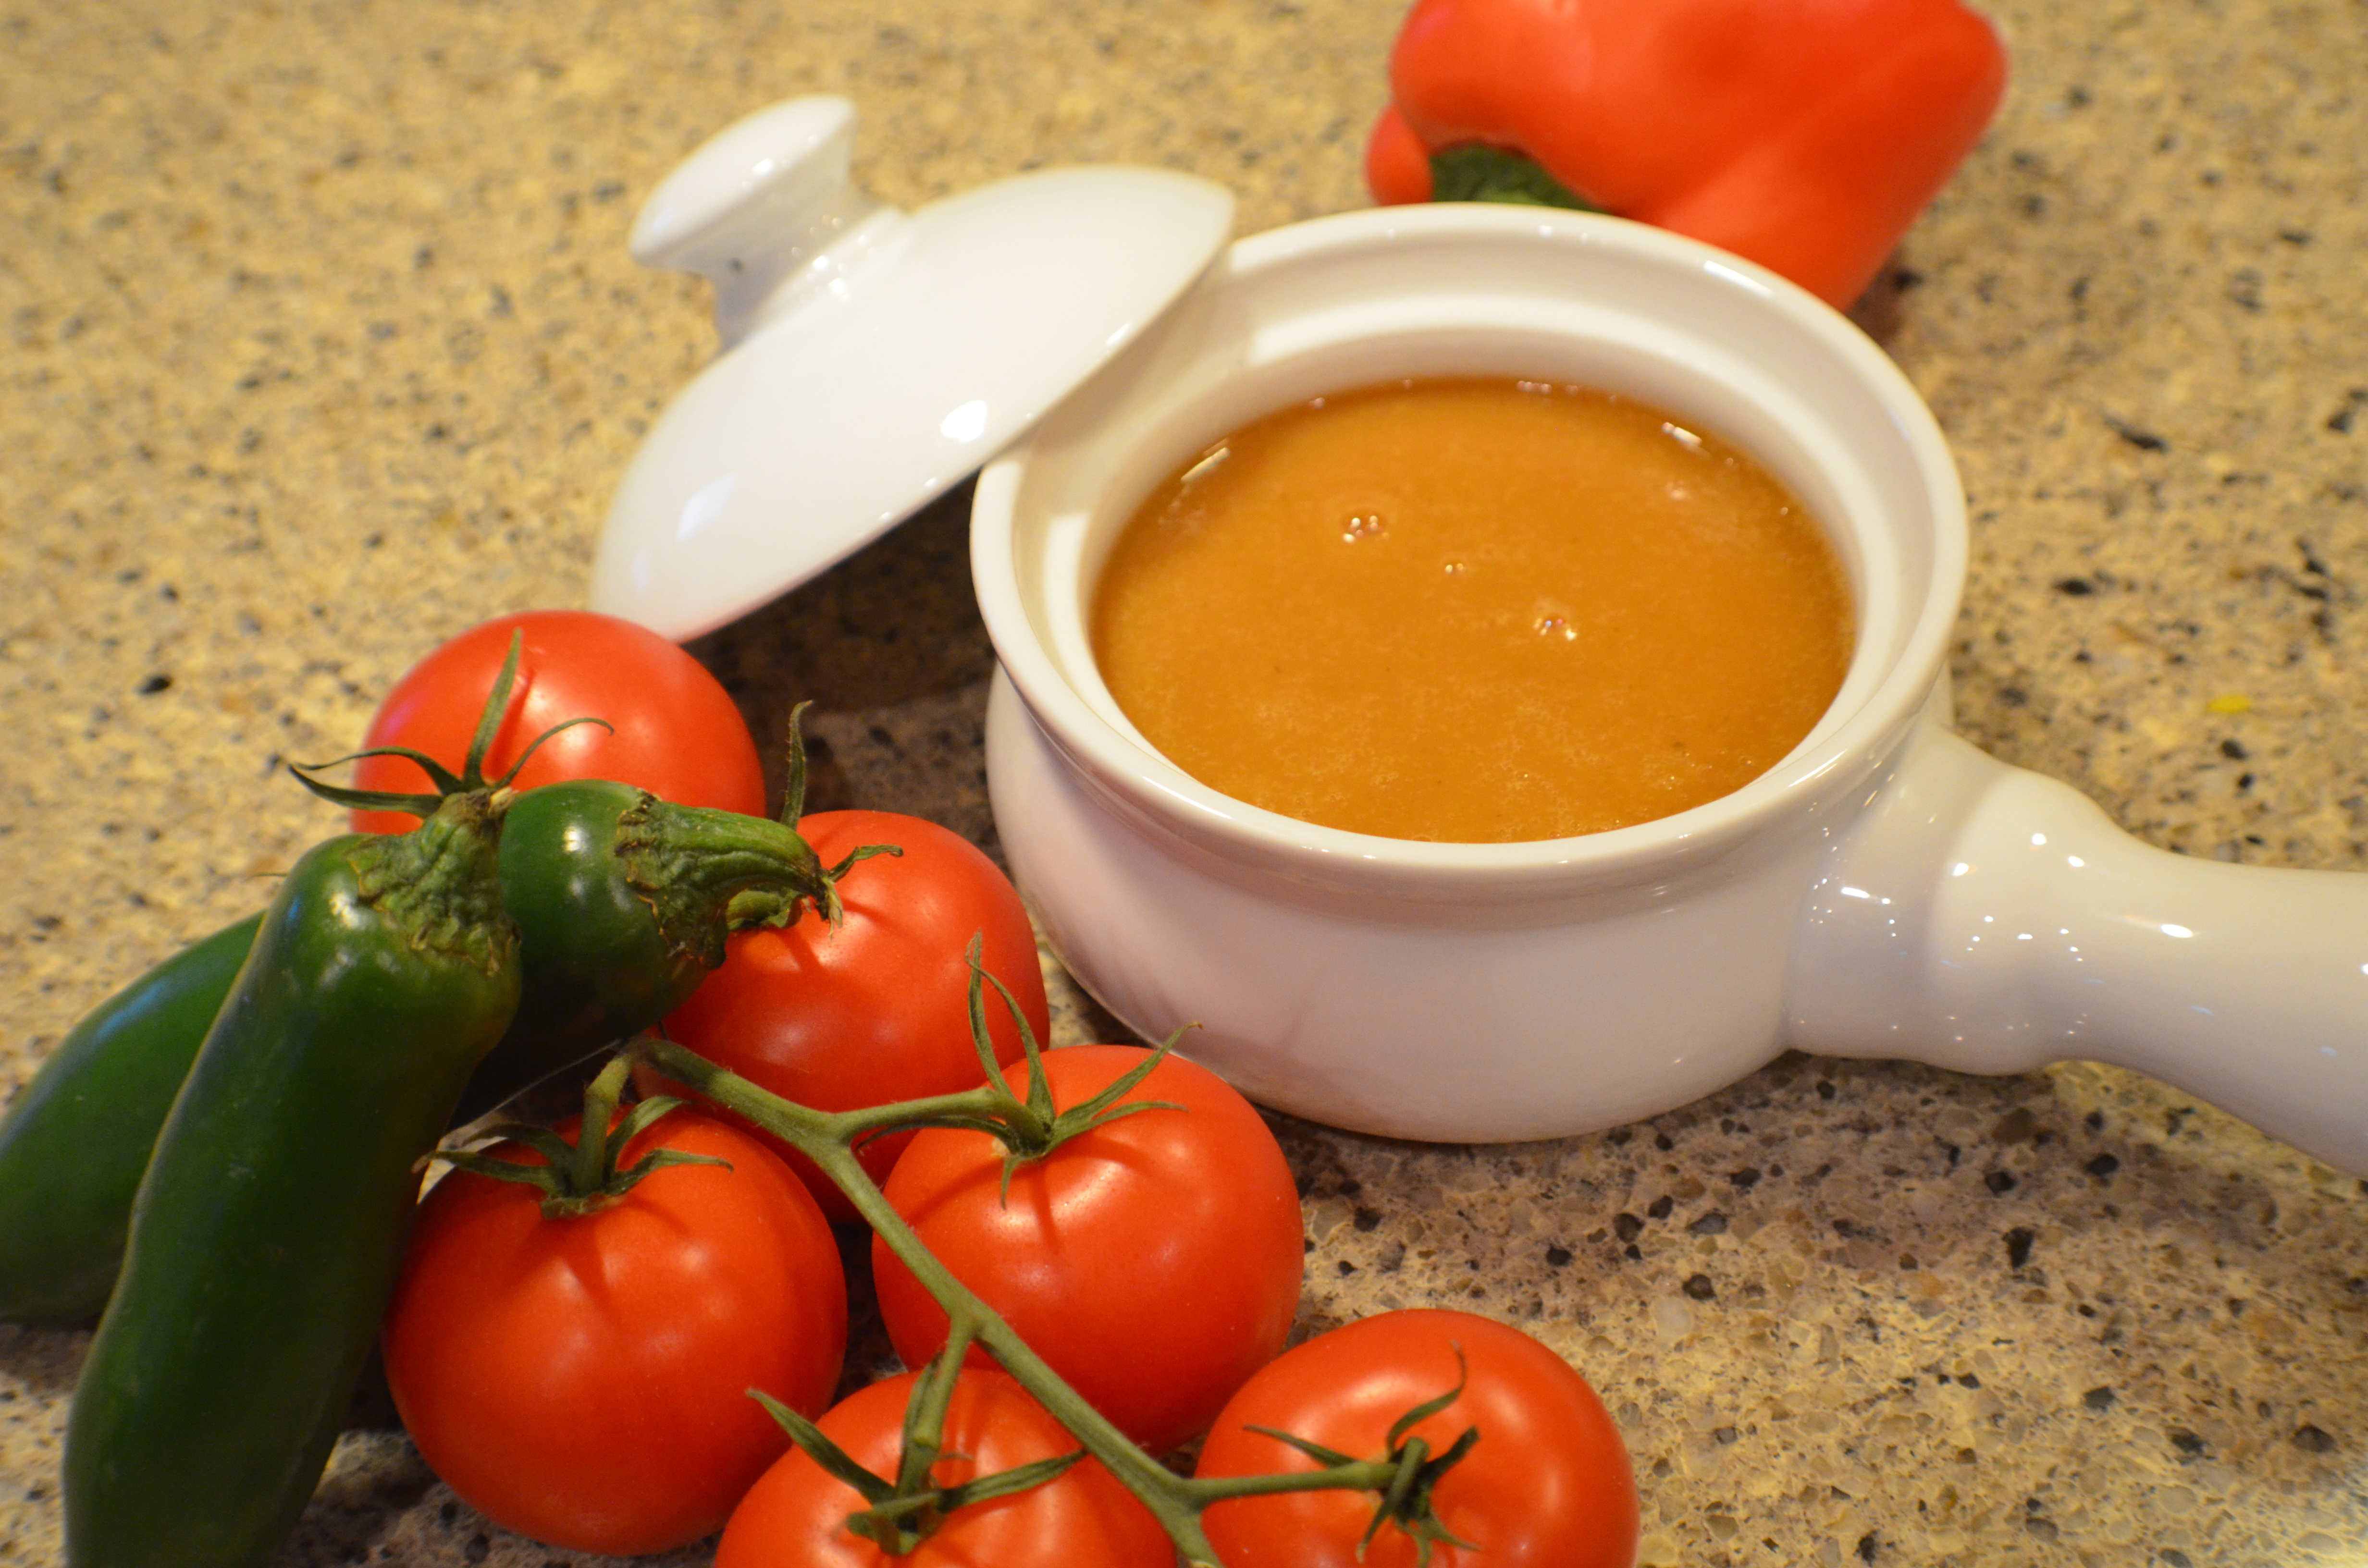 Spicy Tomato and Pepper Soup